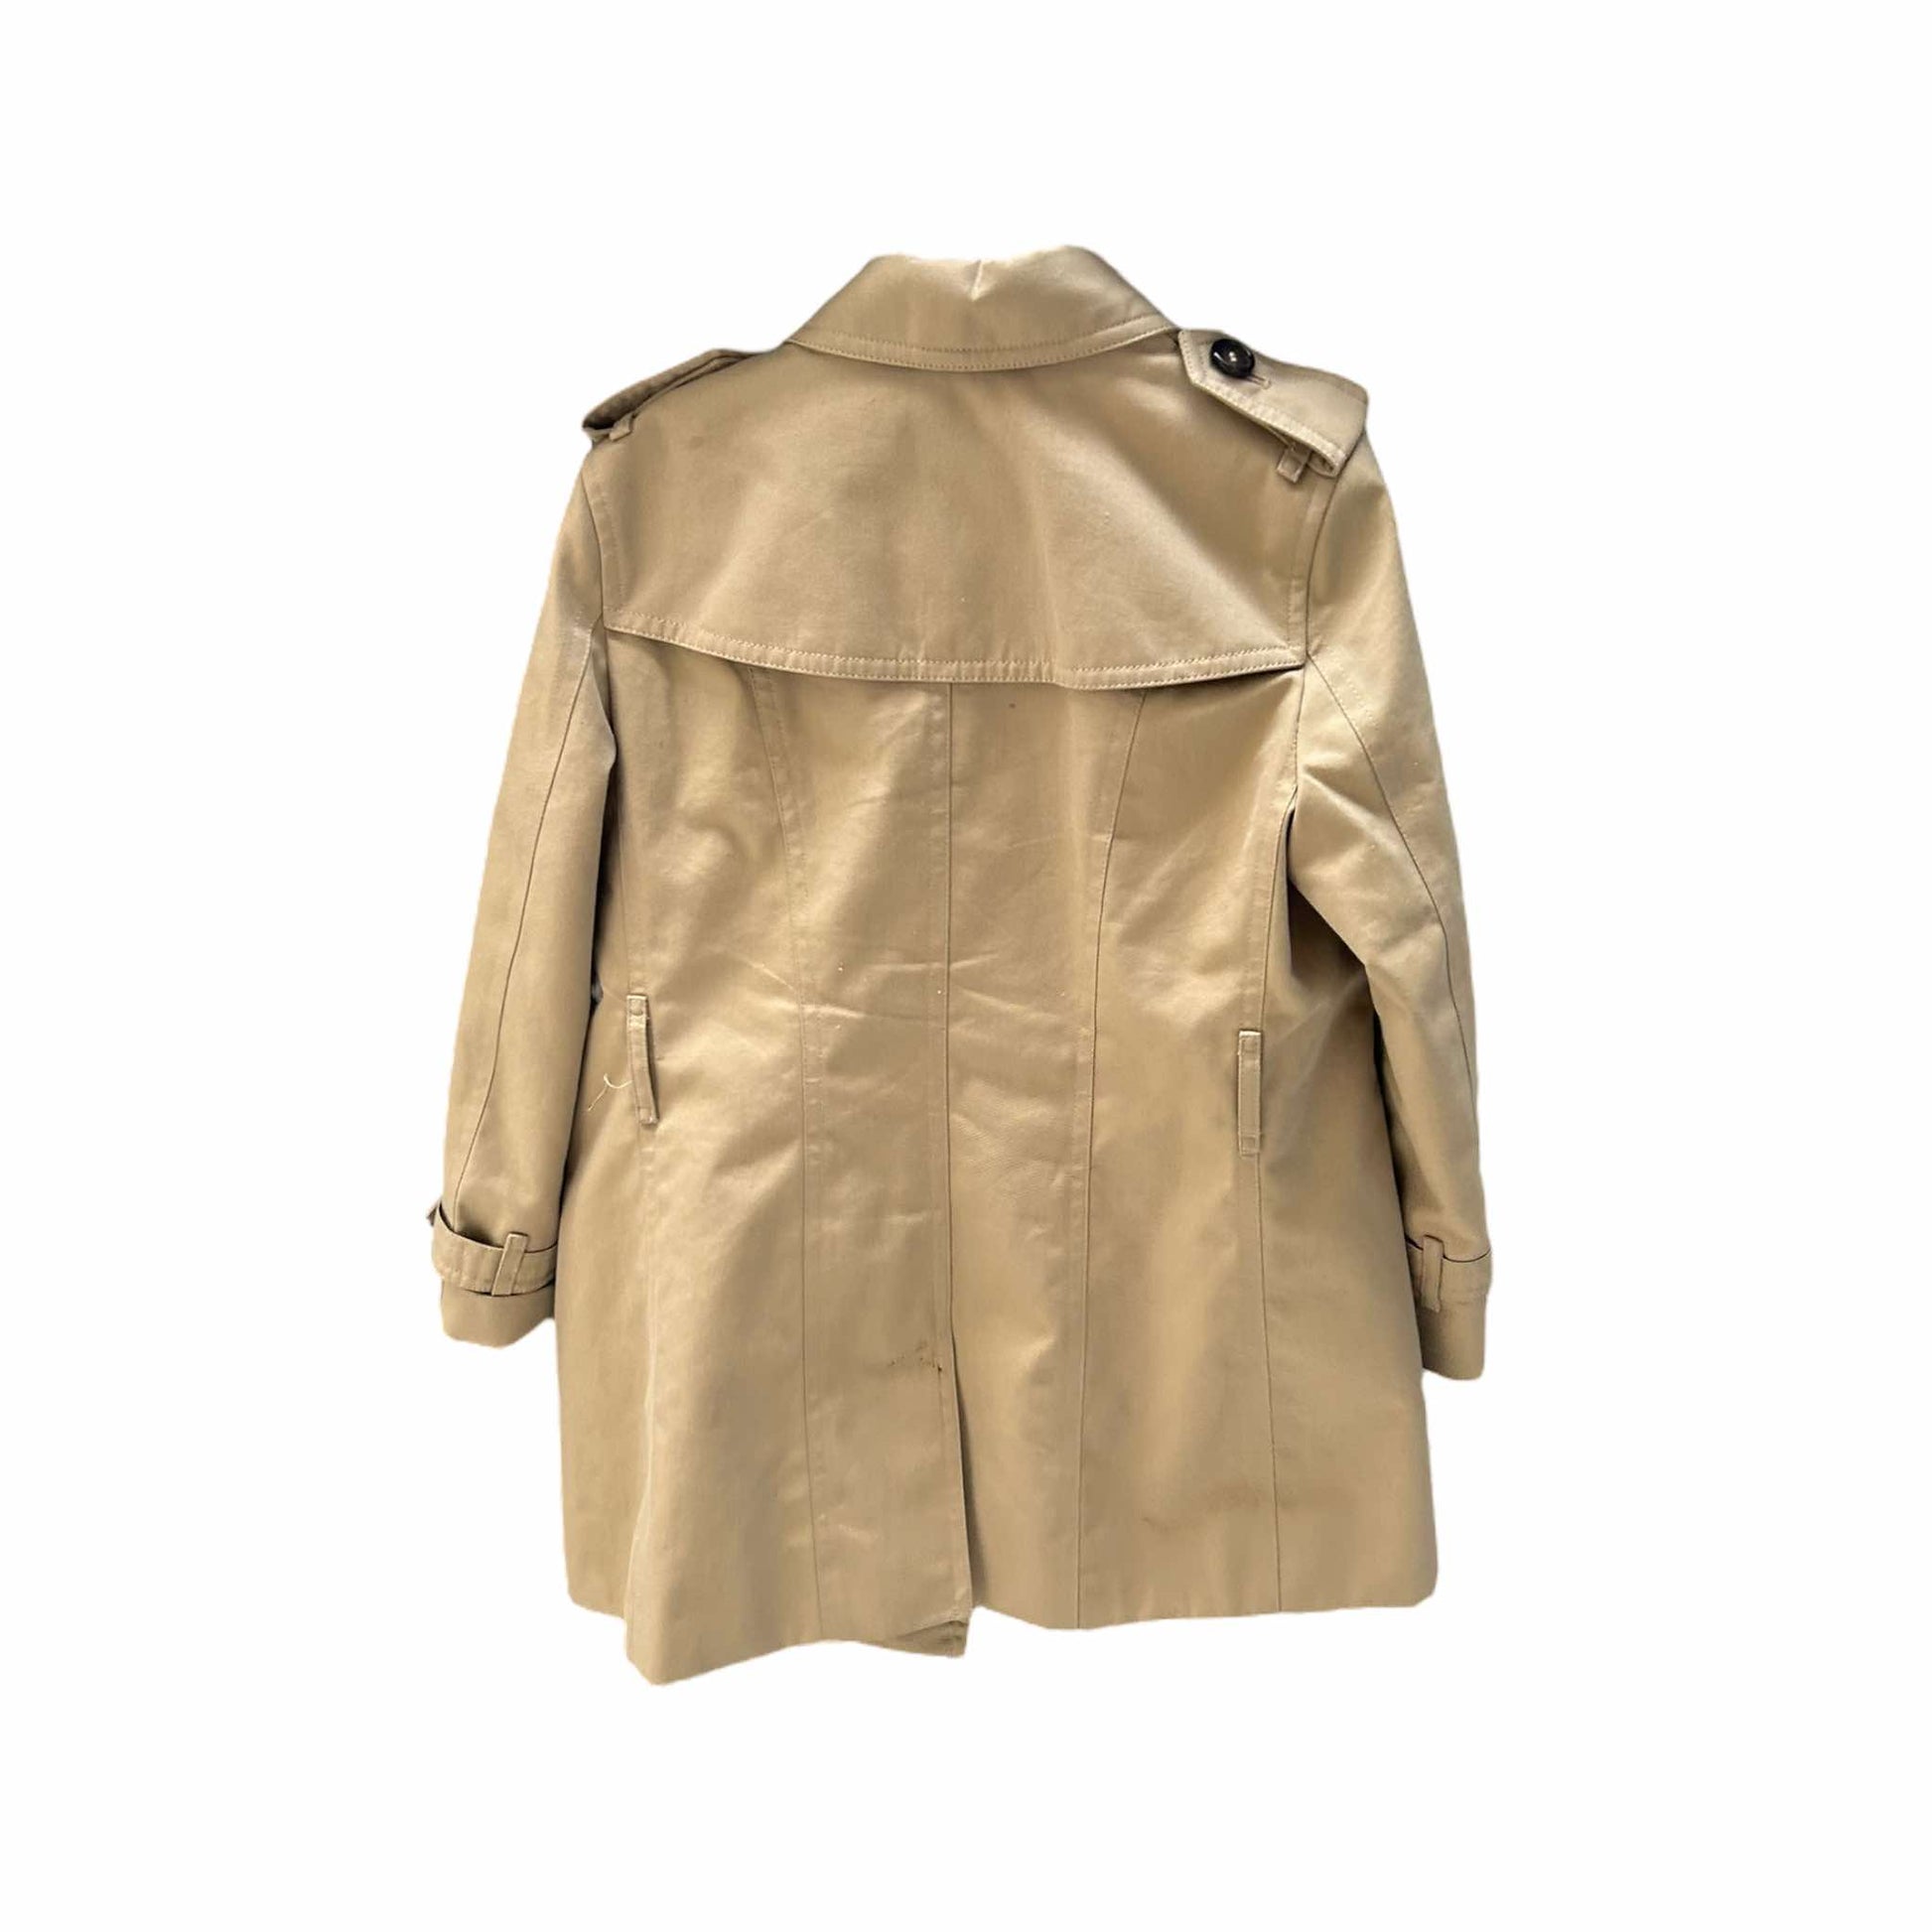 Burberry Trench Coat - 6 Yr - 120cm